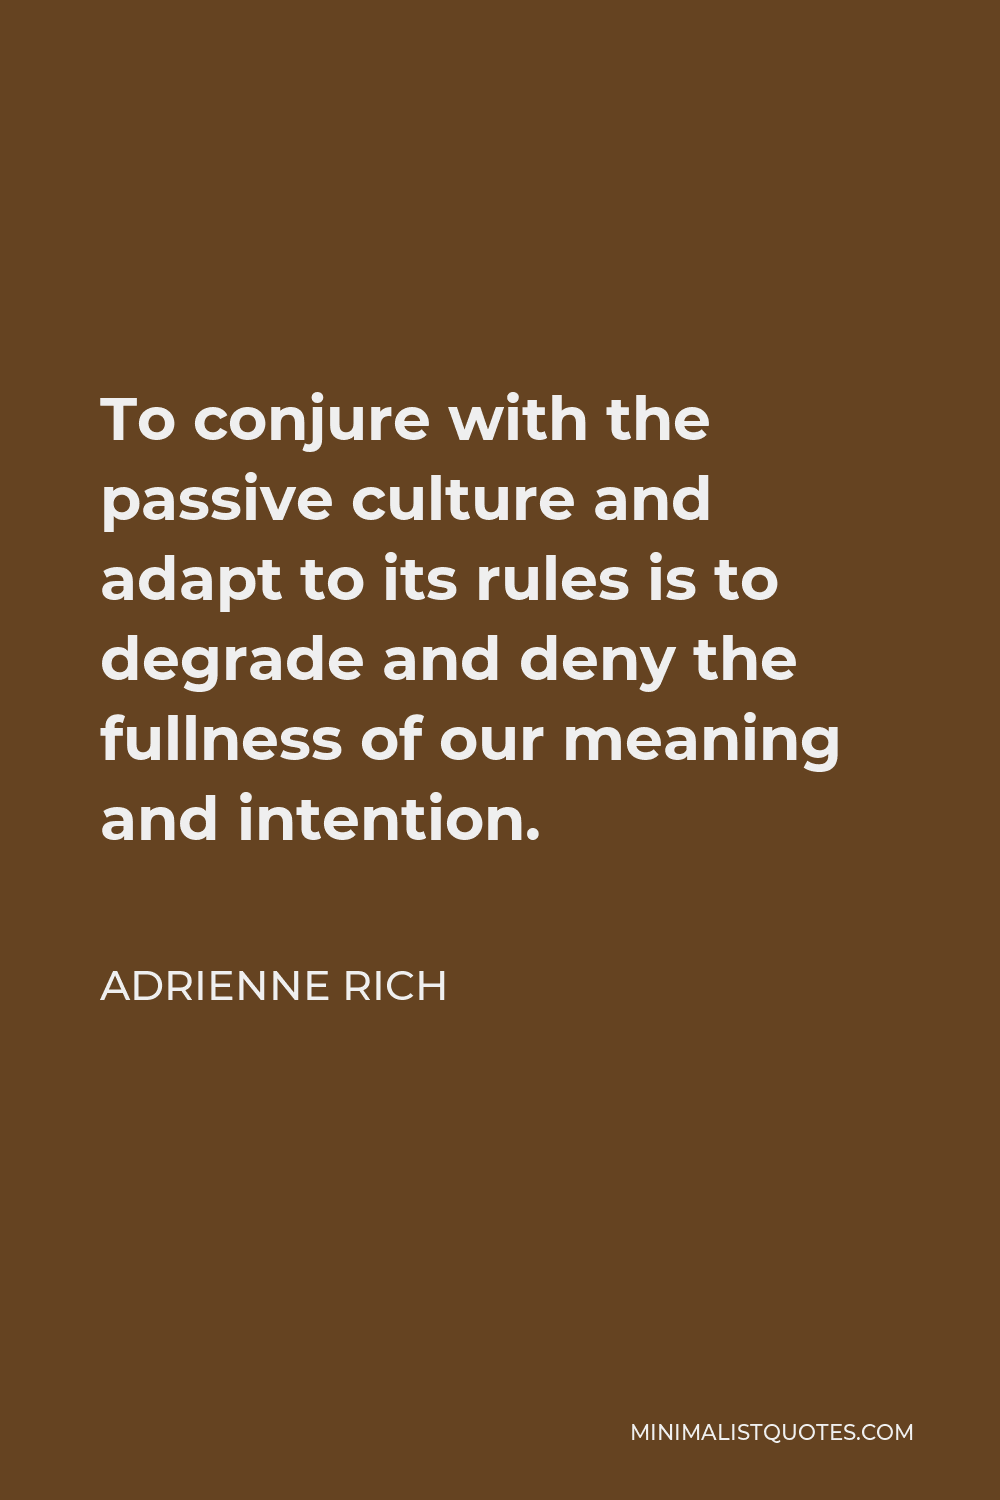 Adrienne Rich Quote - To conjure with the passive culture and adapt to its rules is to degrade and deny the fullness of our meaning and intention.